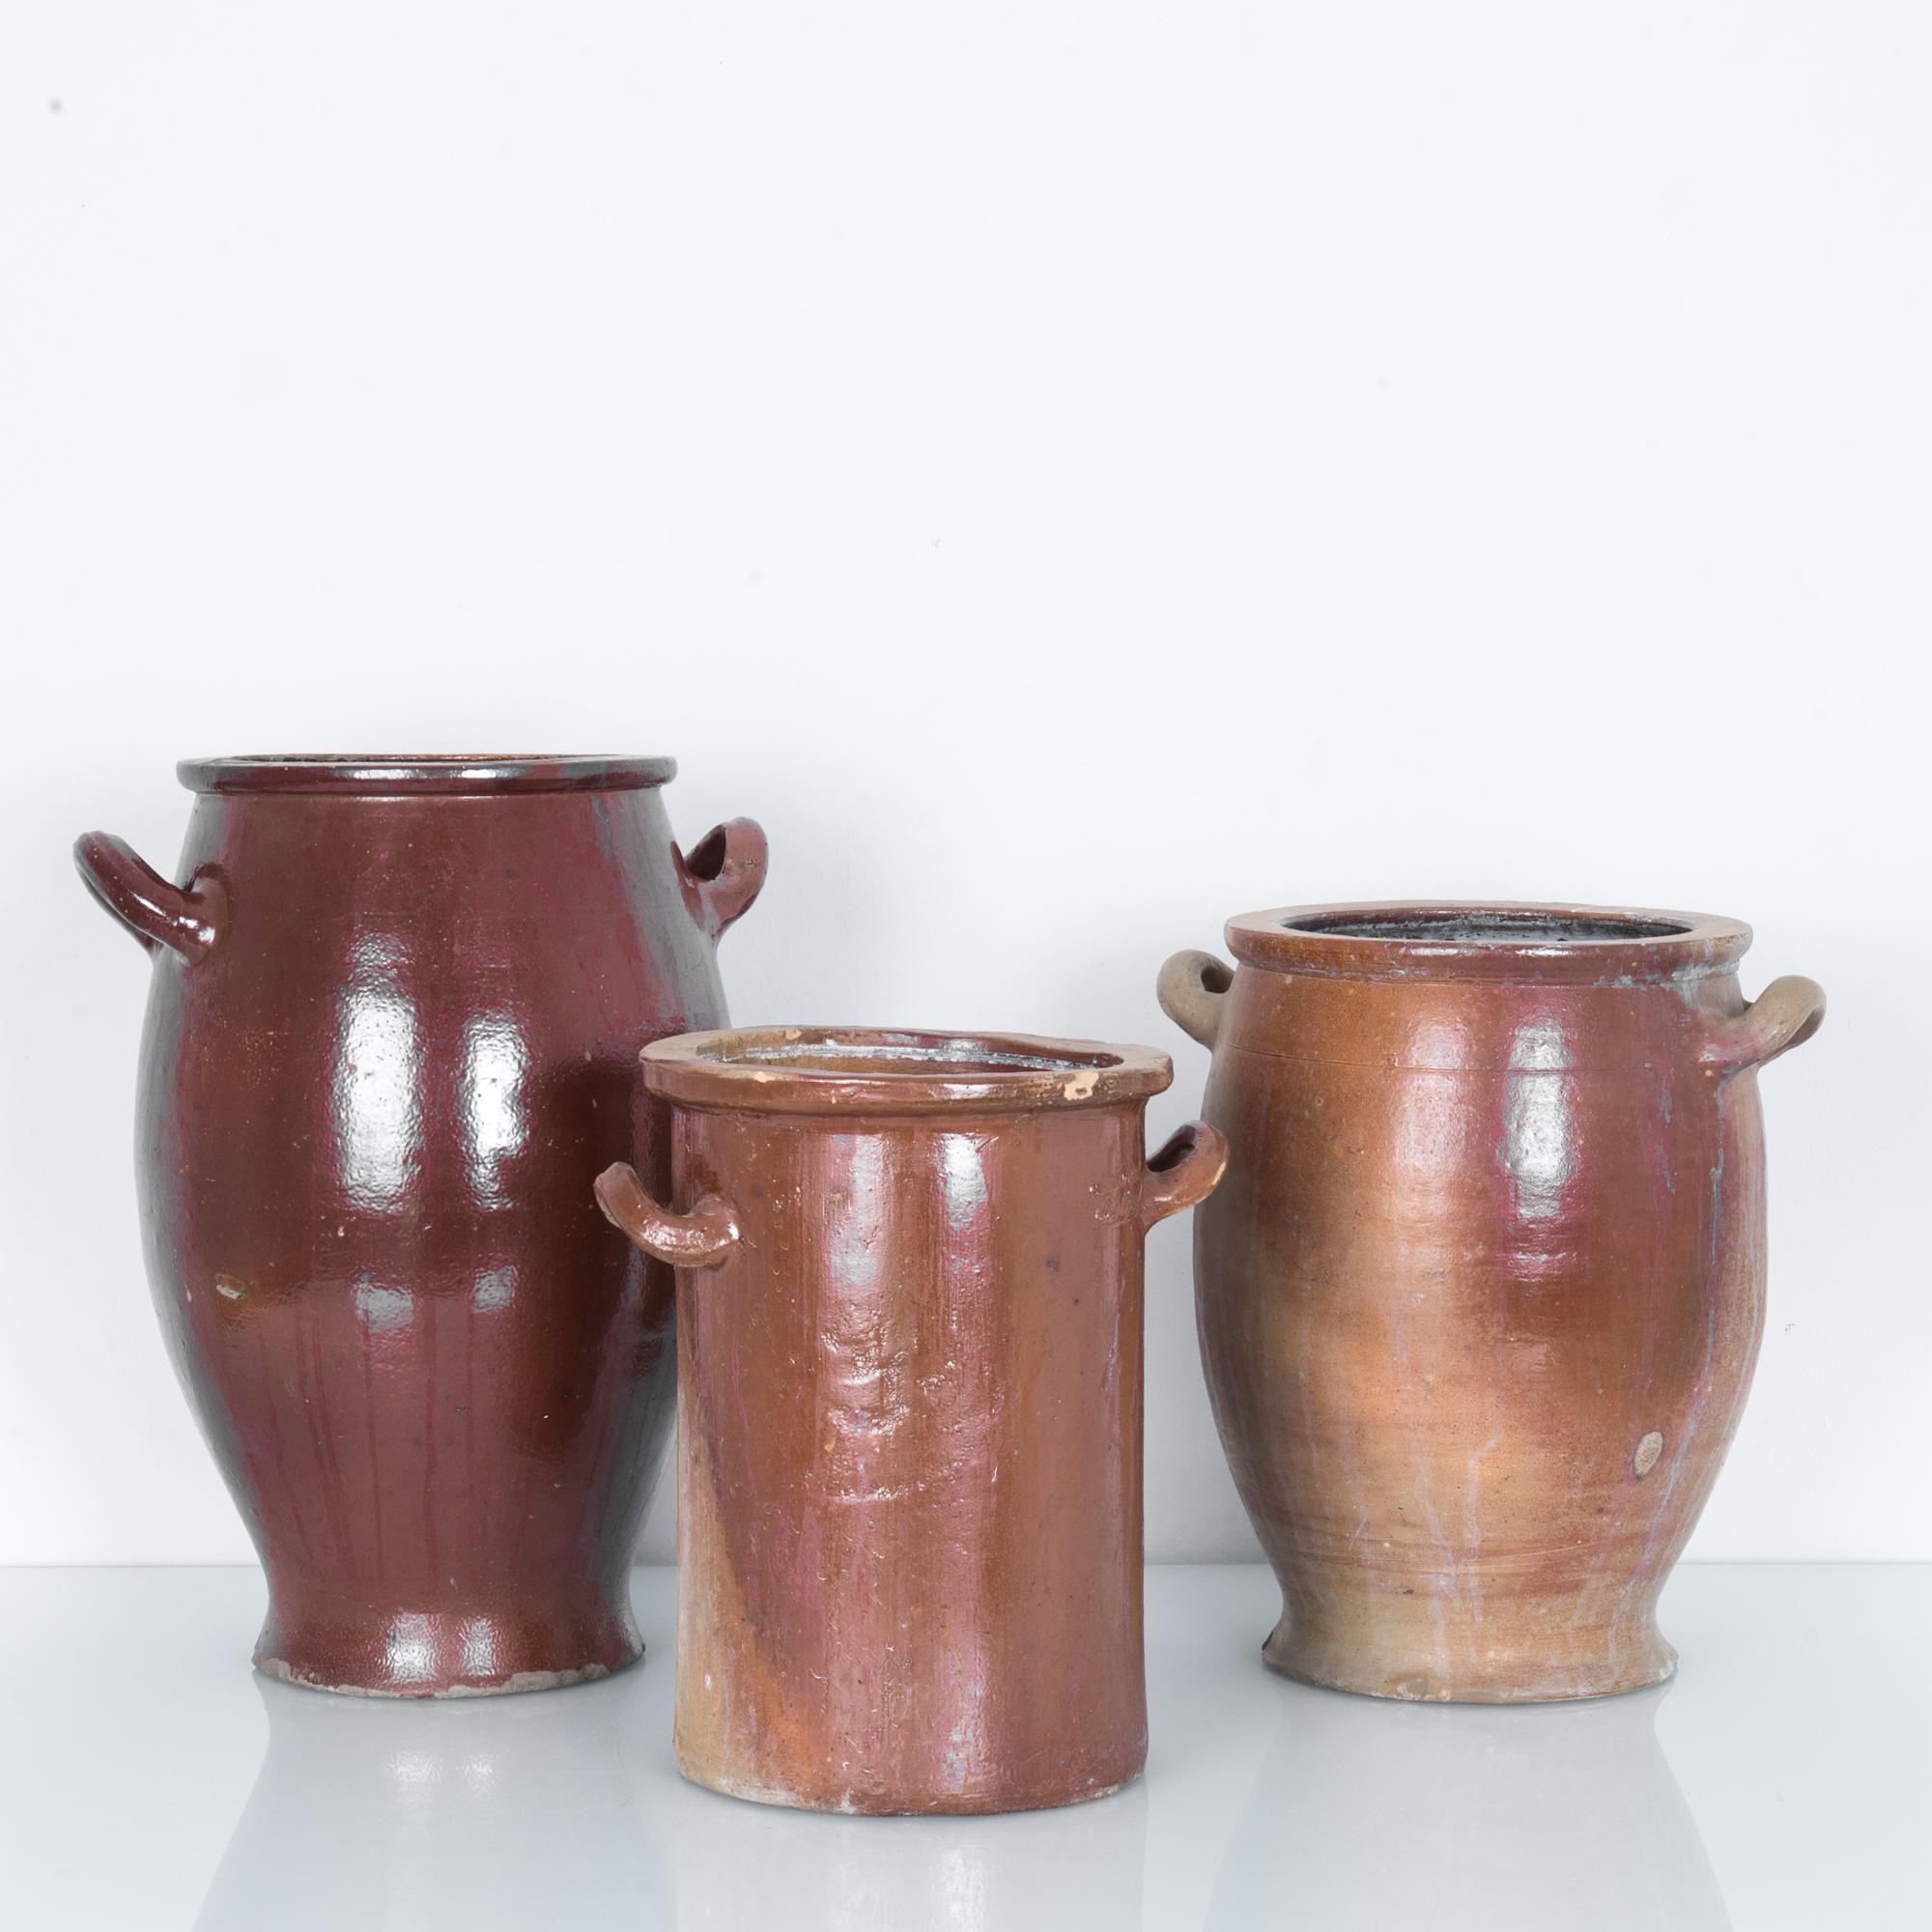 The dominant form of storage for food or agricultural purposes for thousands of years. These workhorse vessels remind us of the humble origins of the country pot. The subtle beauty found in everyday practicality. These stoneware vessels come from